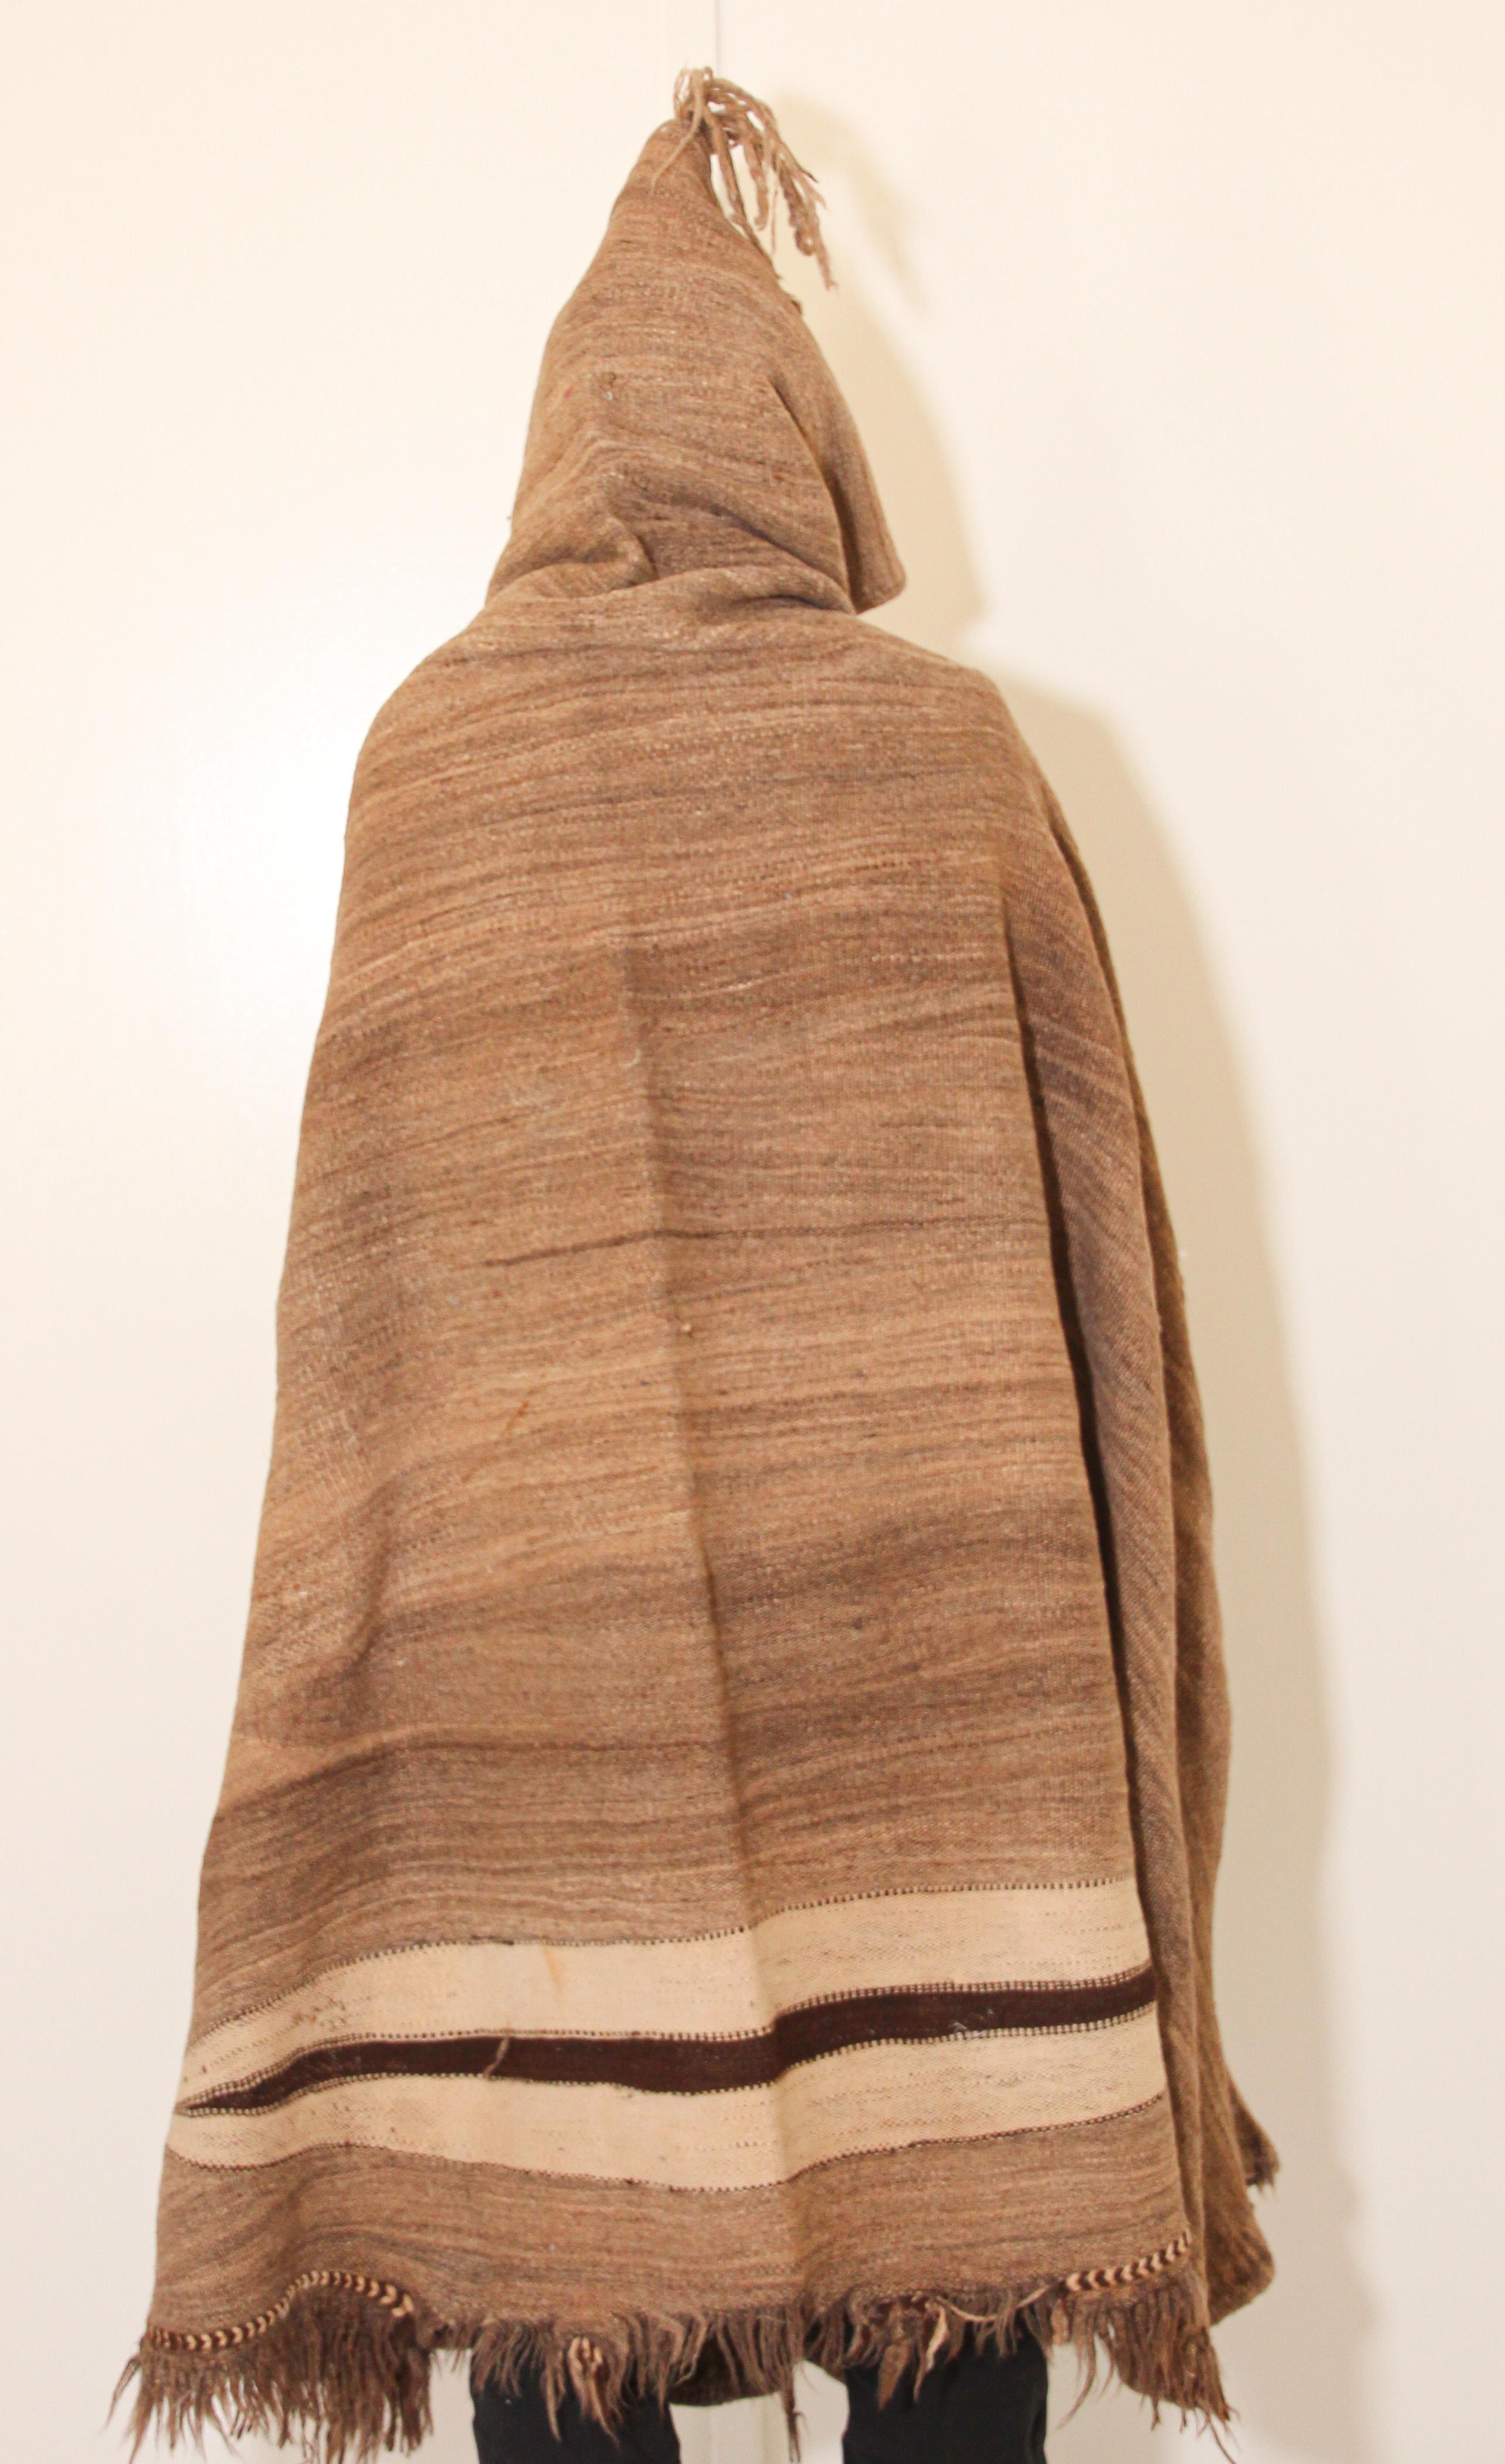 Moroccan Akhnif Berber hooded burnous cape in handwoven brown wool.
Tribal traditional cape with hood handwoven in the High Atlas Mountains.
Tribal design in the back, great shades of brown natural organic wool colors.
The burnus (also called a